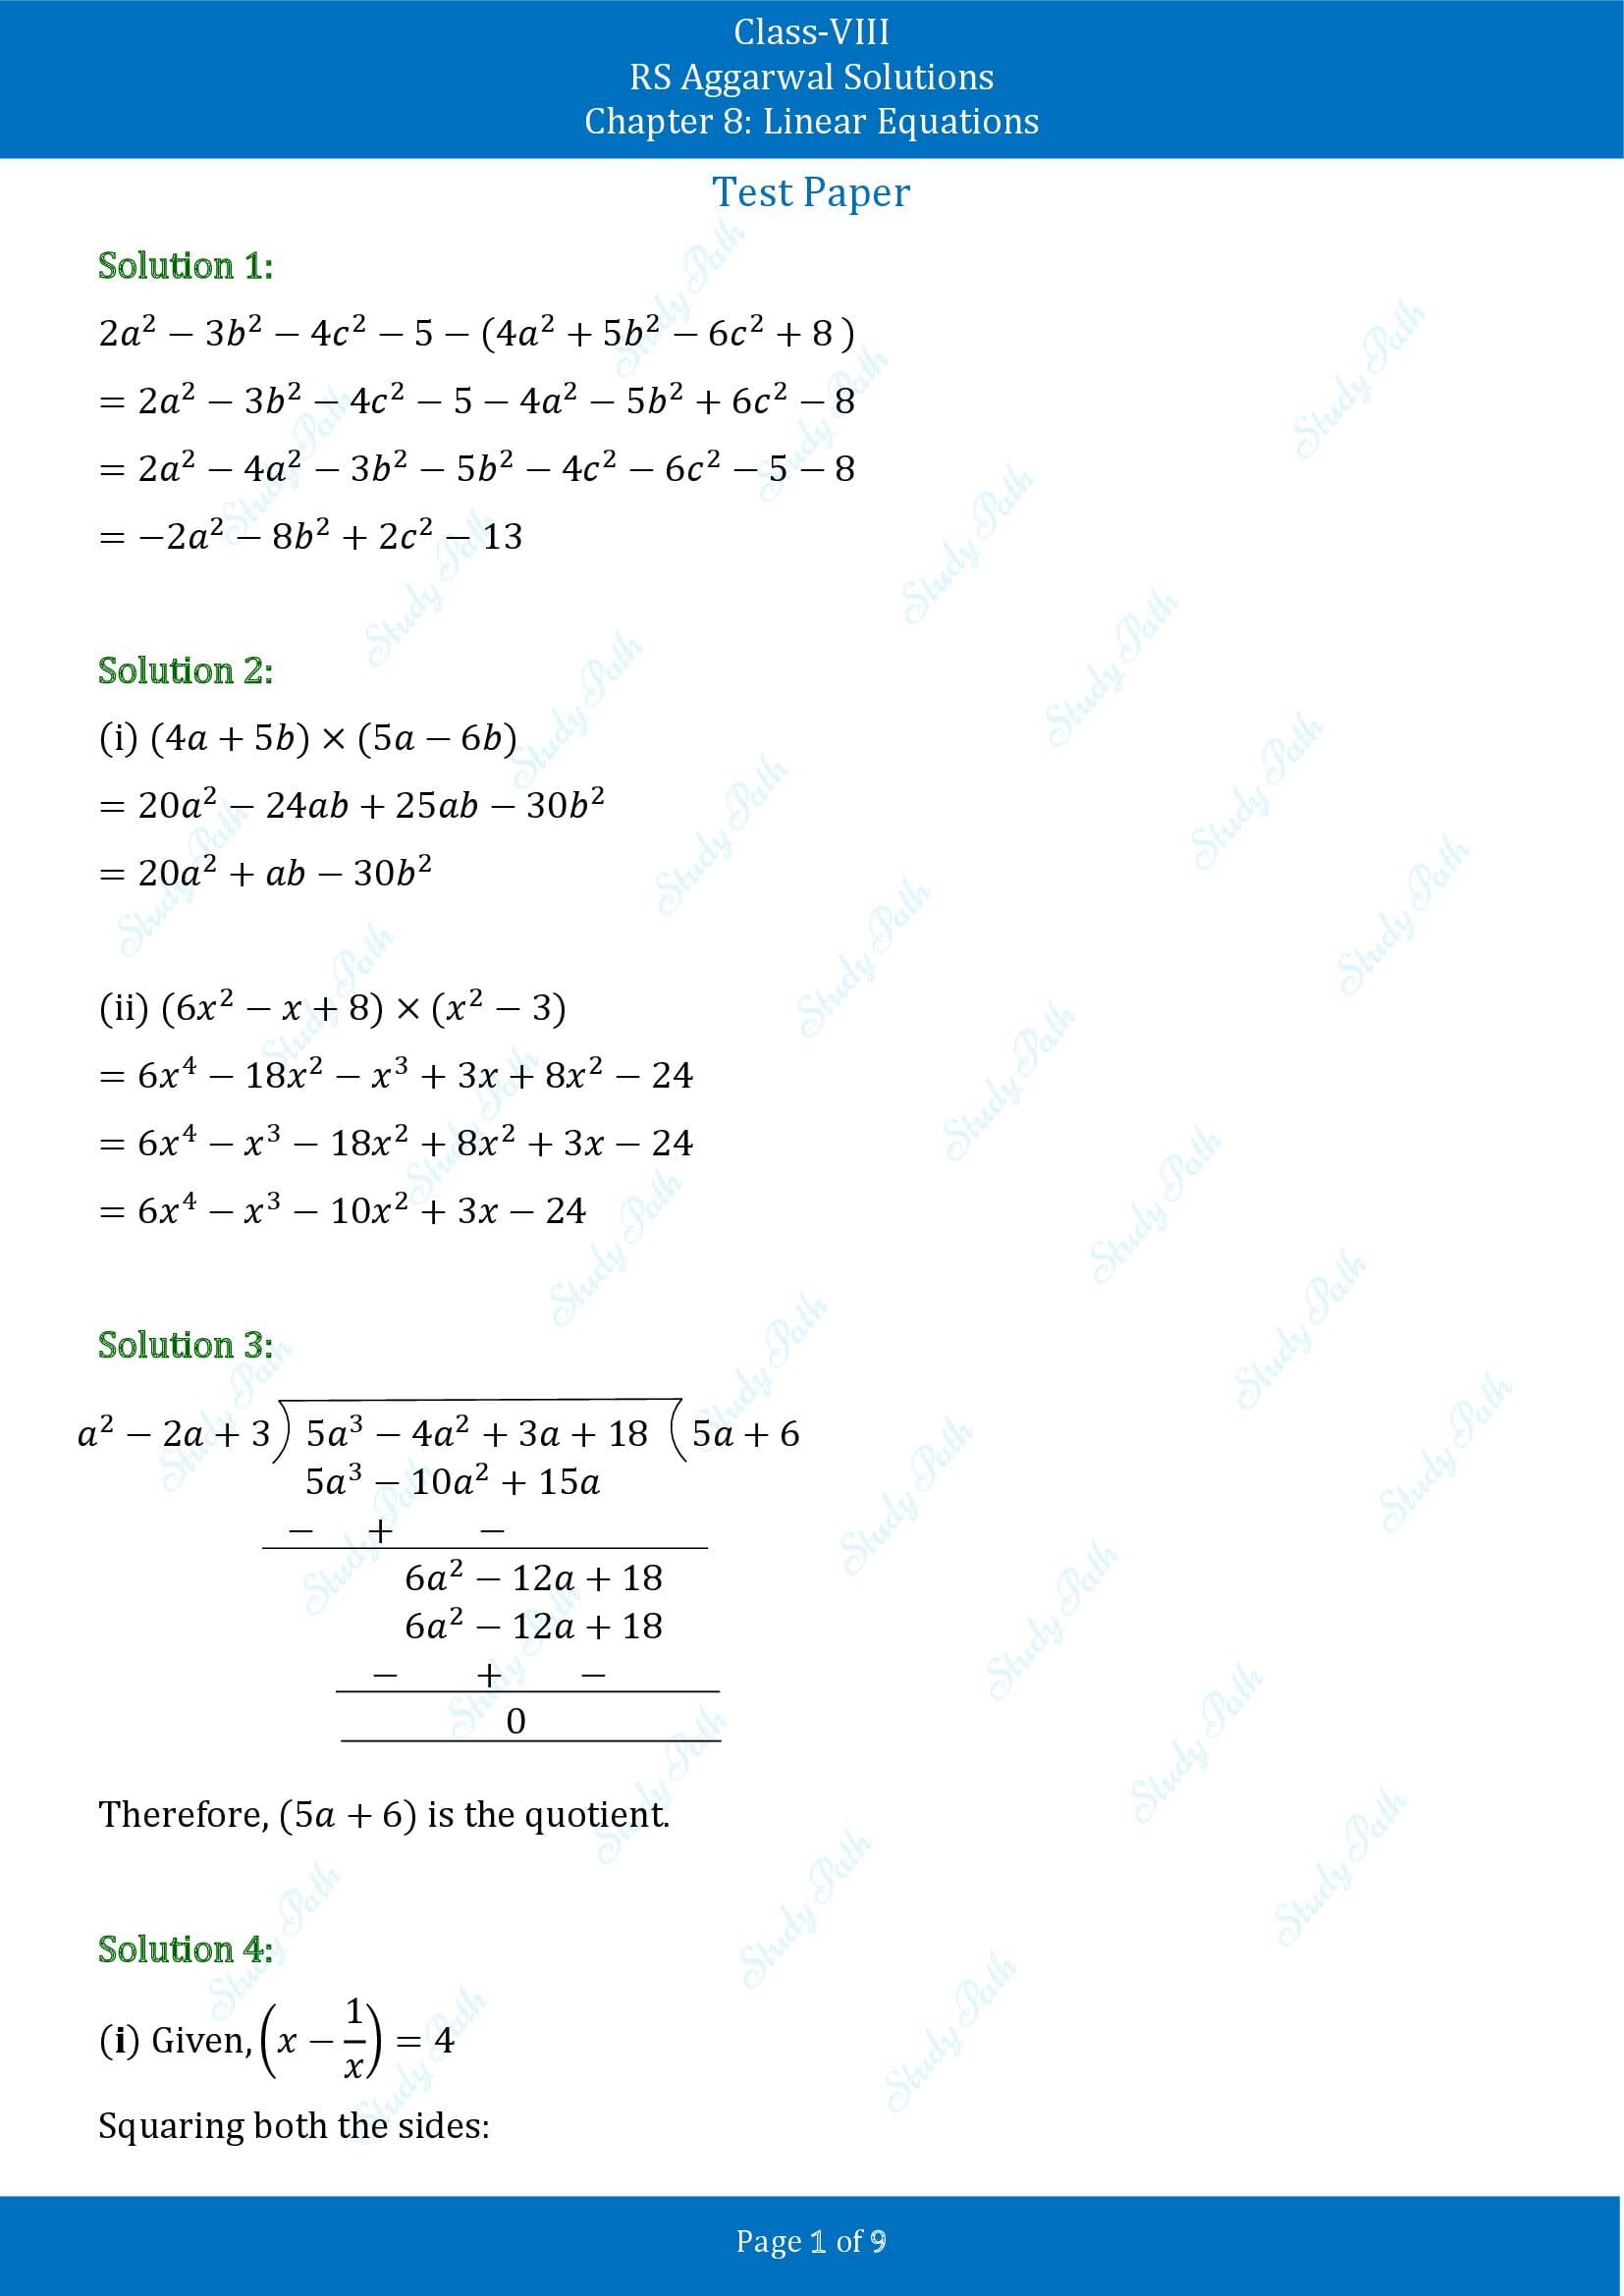 RS Aggarwal Solutions Class 8 Chapter 8 Linear Equations Test Paper 00001